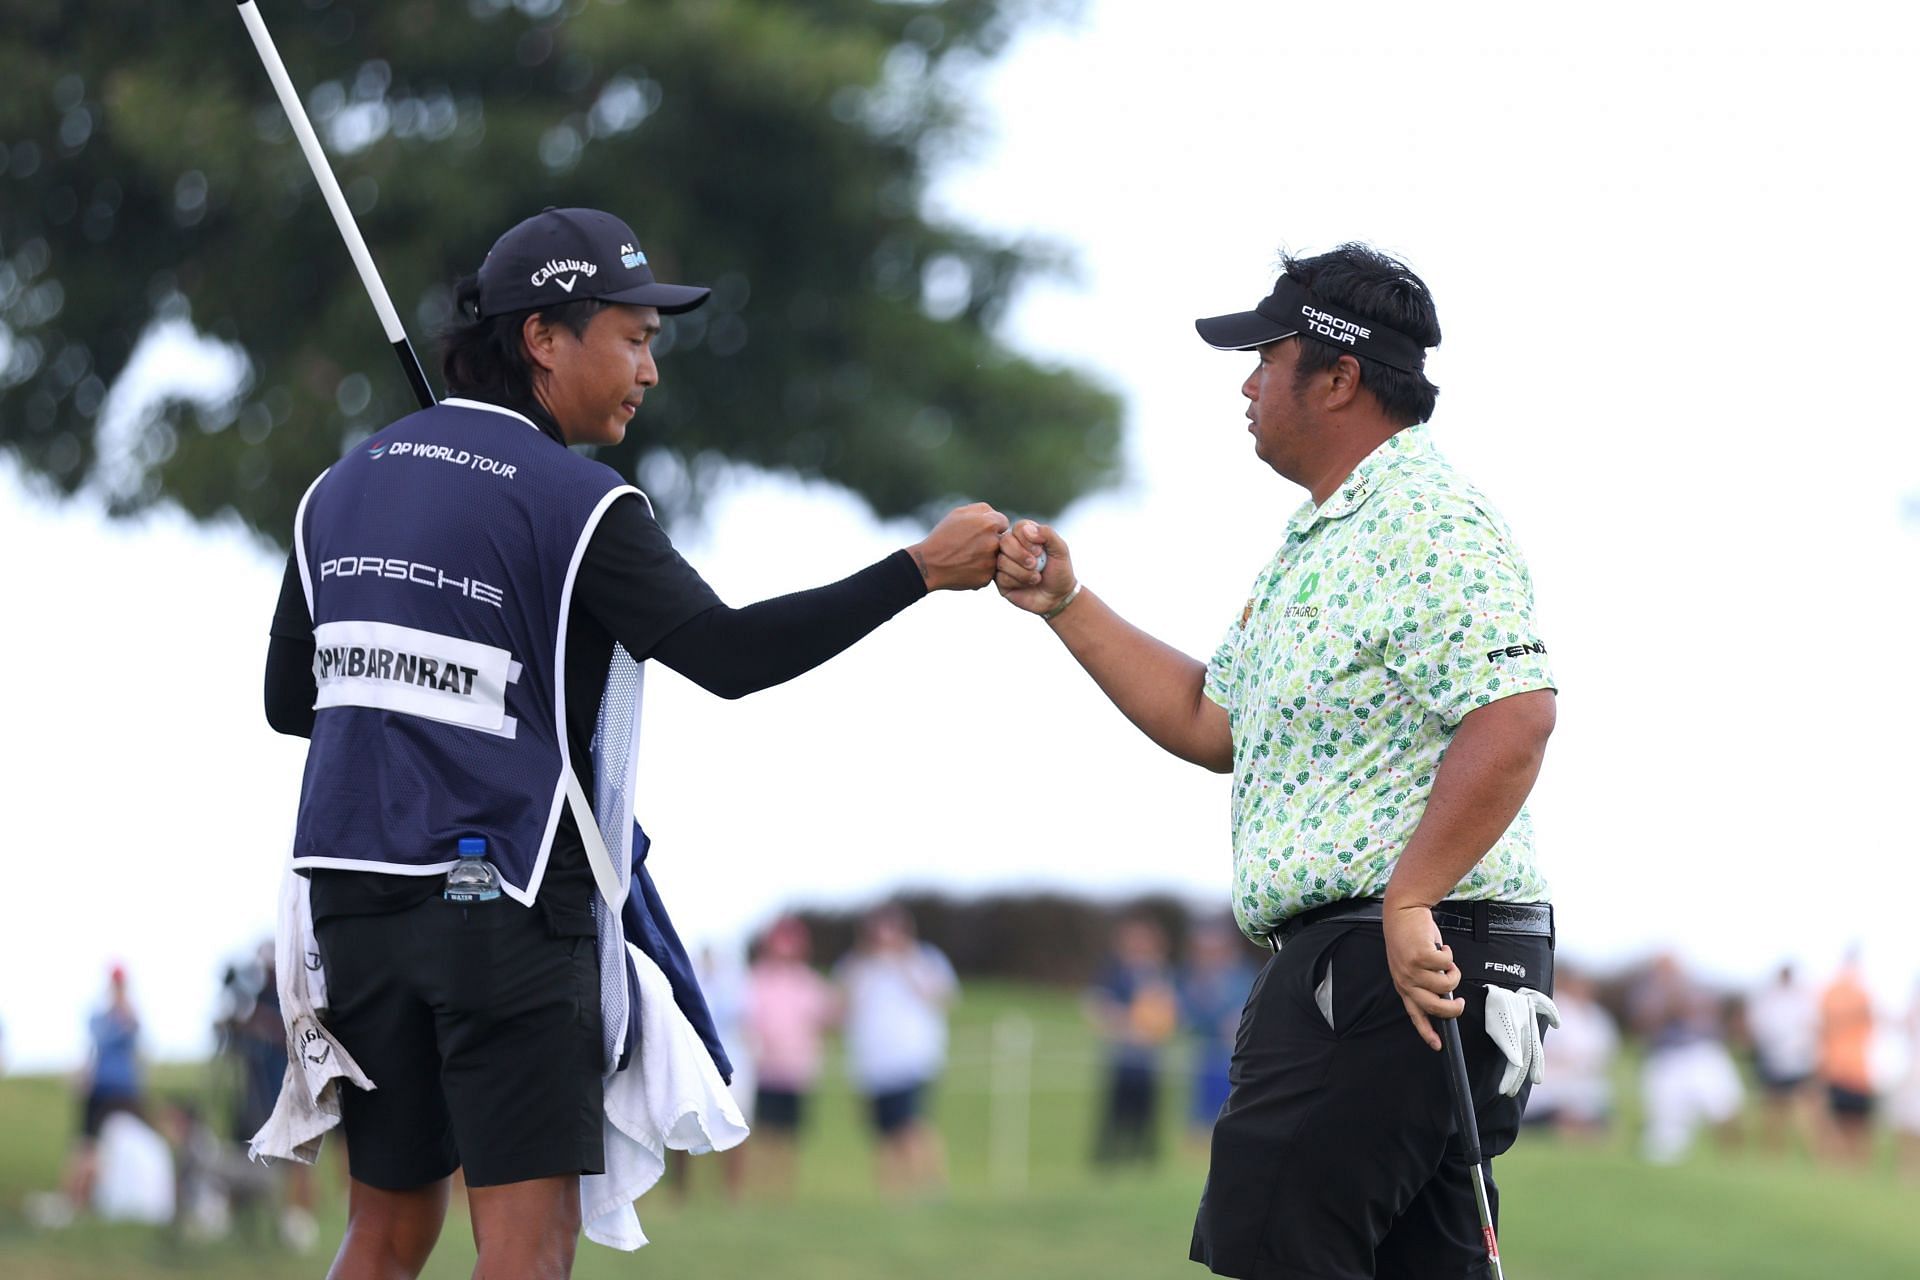 Kiradech Aphibarnrat finished runner-up at the Porsche Singapore Classic